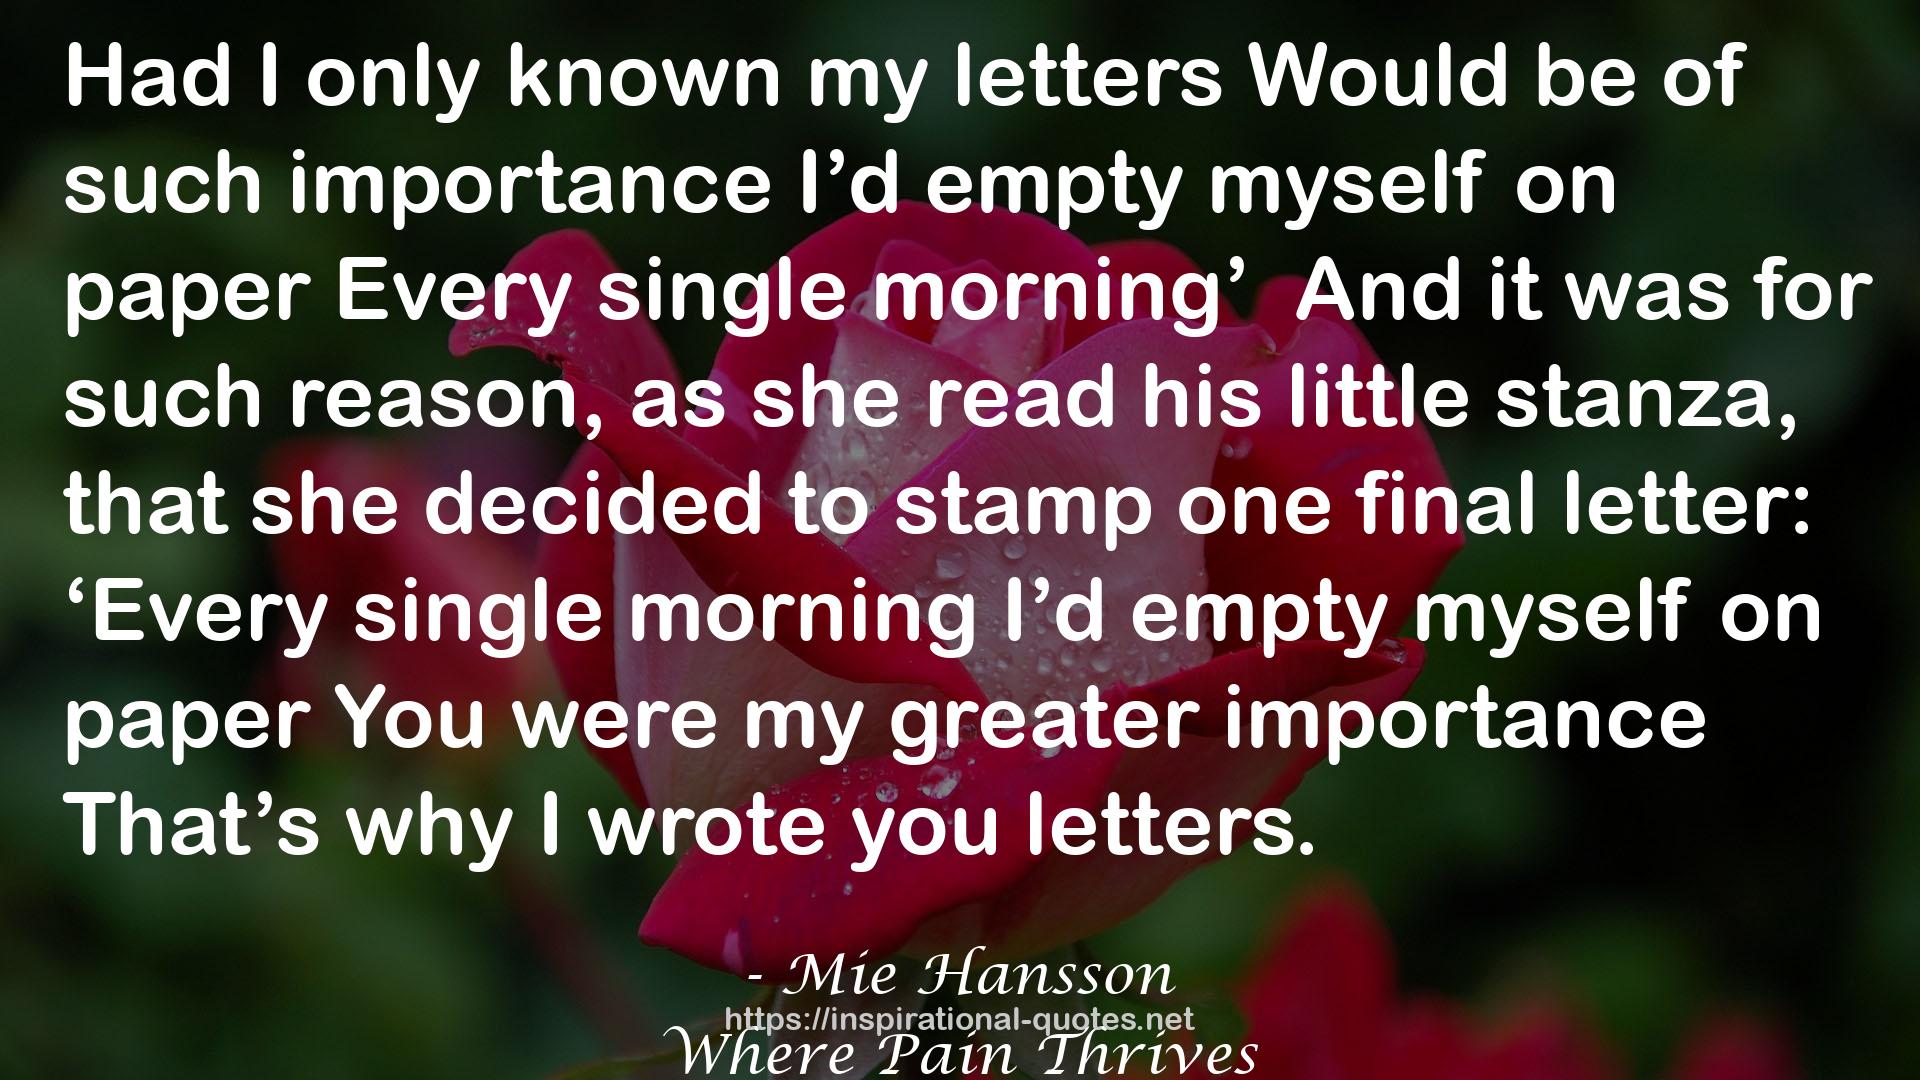 stamponefinalletter:‘Every  QUOTES